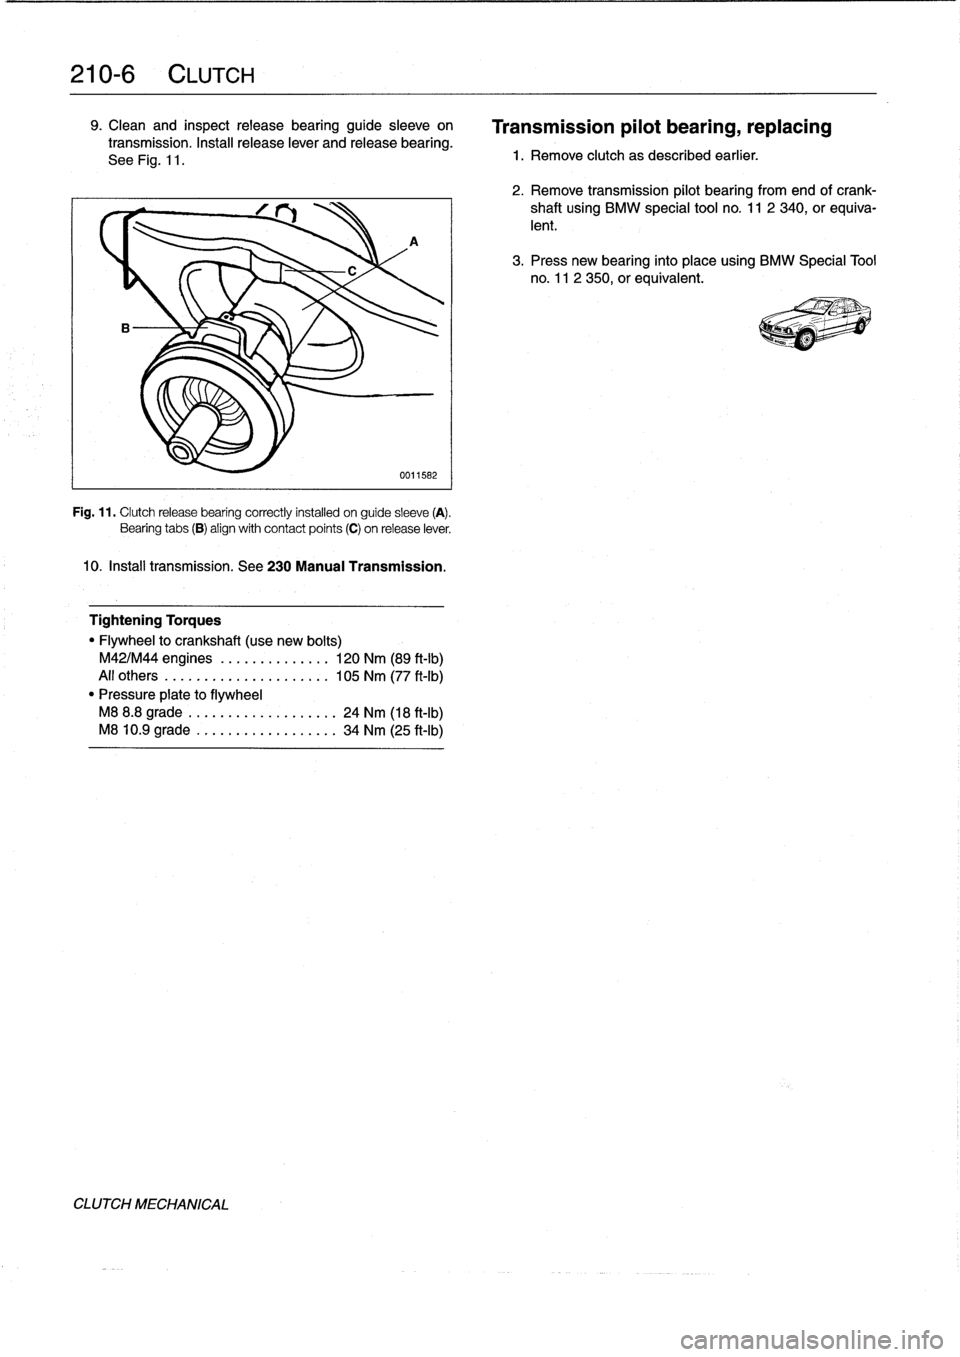 BMW 325i 1992 E36 Owners Manual 
210-
6
CLUTCH

9
.
Clean
and
inspectrelease
bearing
guide
sleeve
on

transmission
.
Install
release
lever
and
release
bearing
.

See
Fig
.
11
.

A

0011582

Fig
.
11
.
Clutchrelease
bearing
correctly